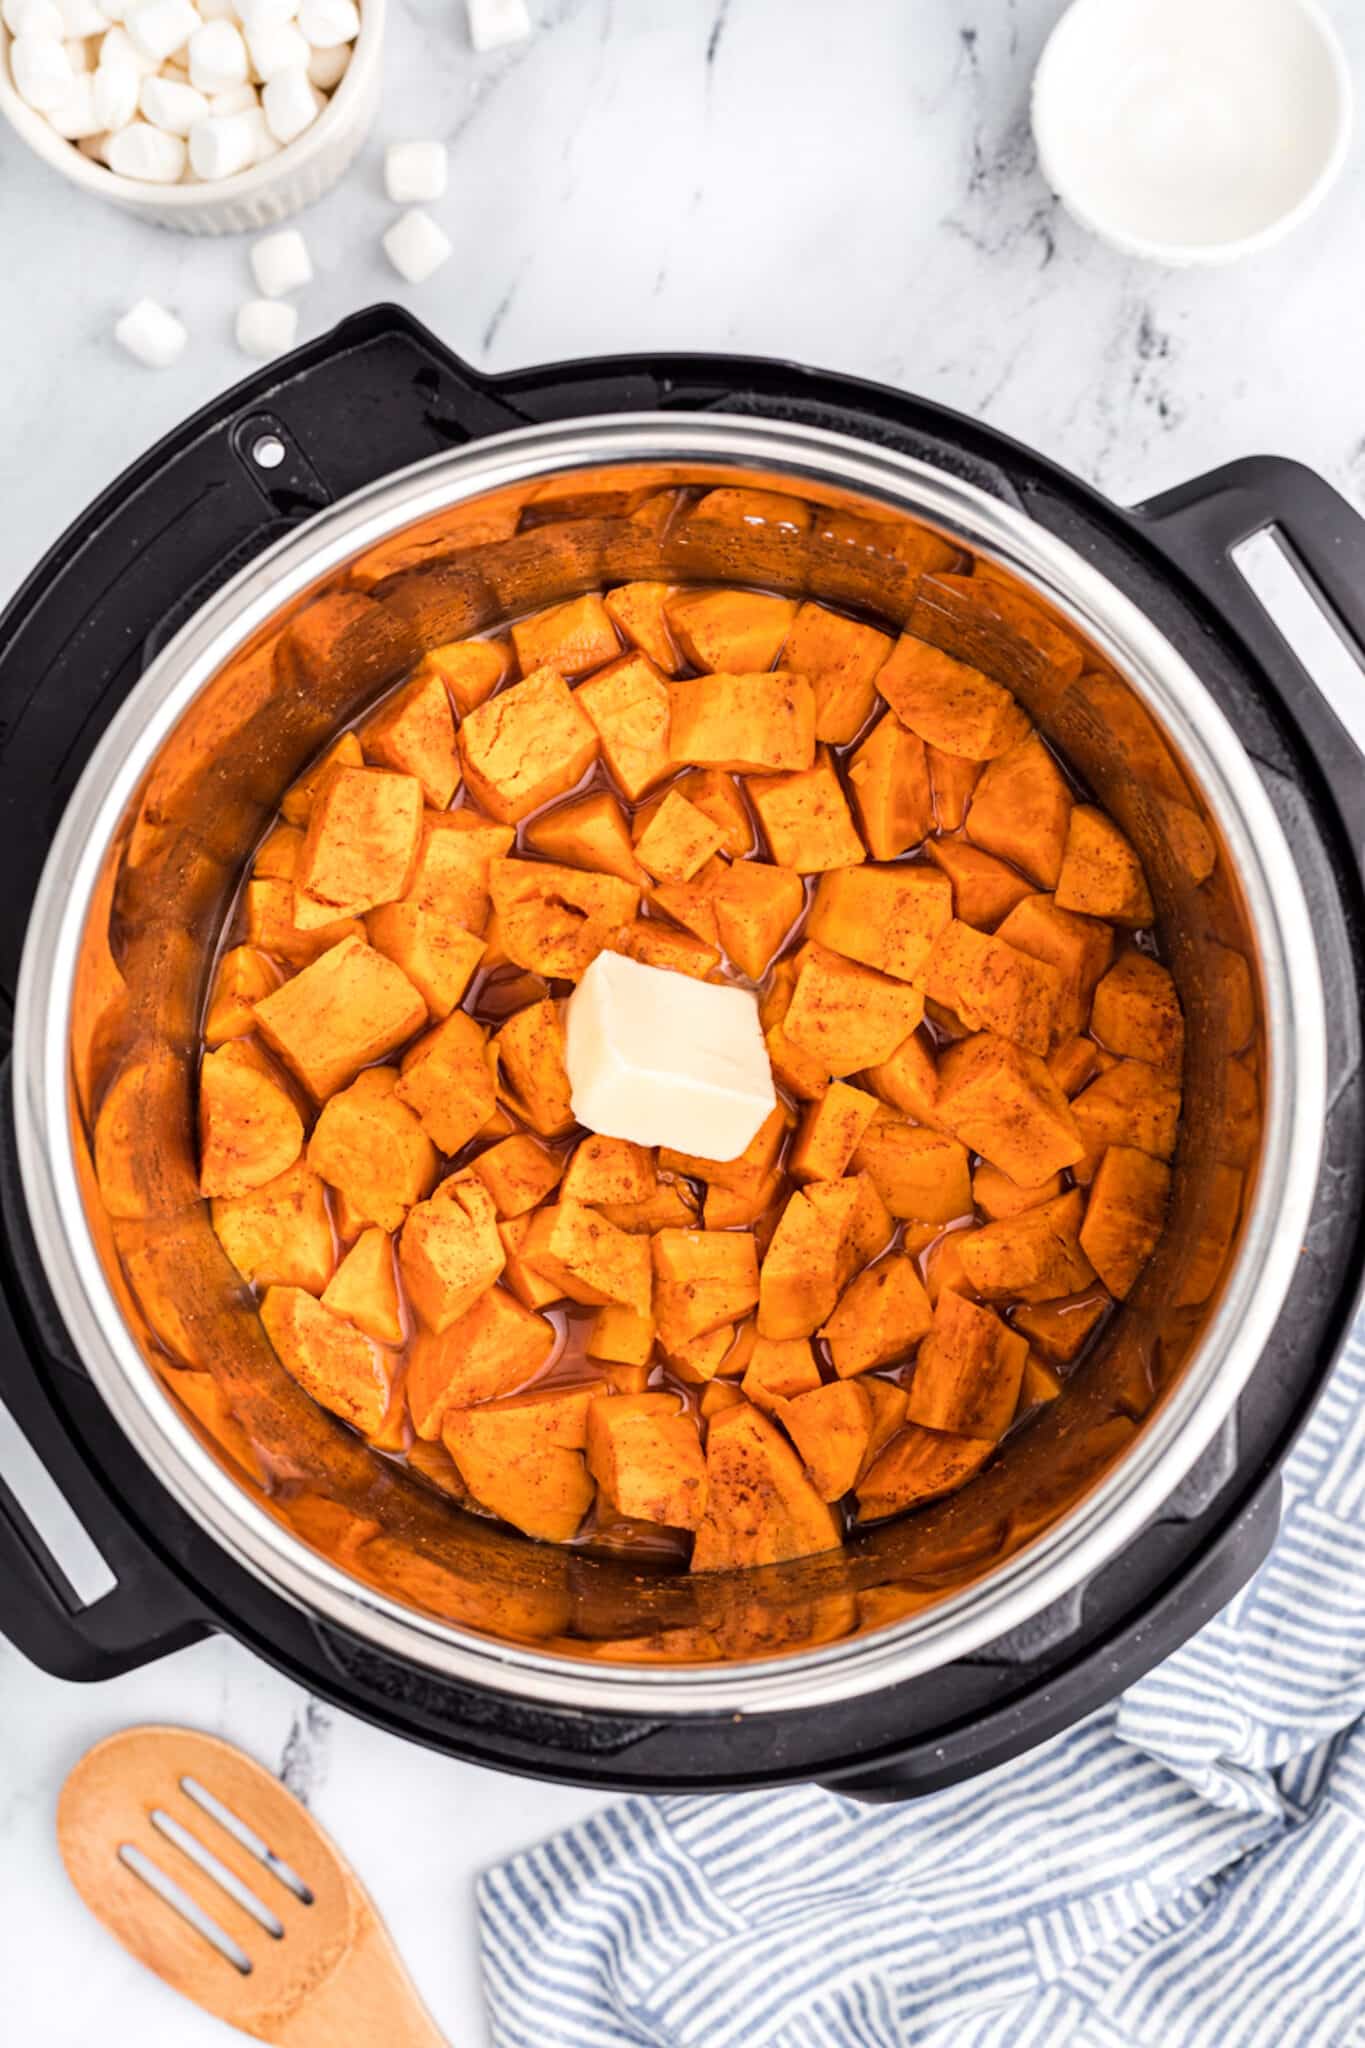 Diced yams in the insert of an Instant Pot.